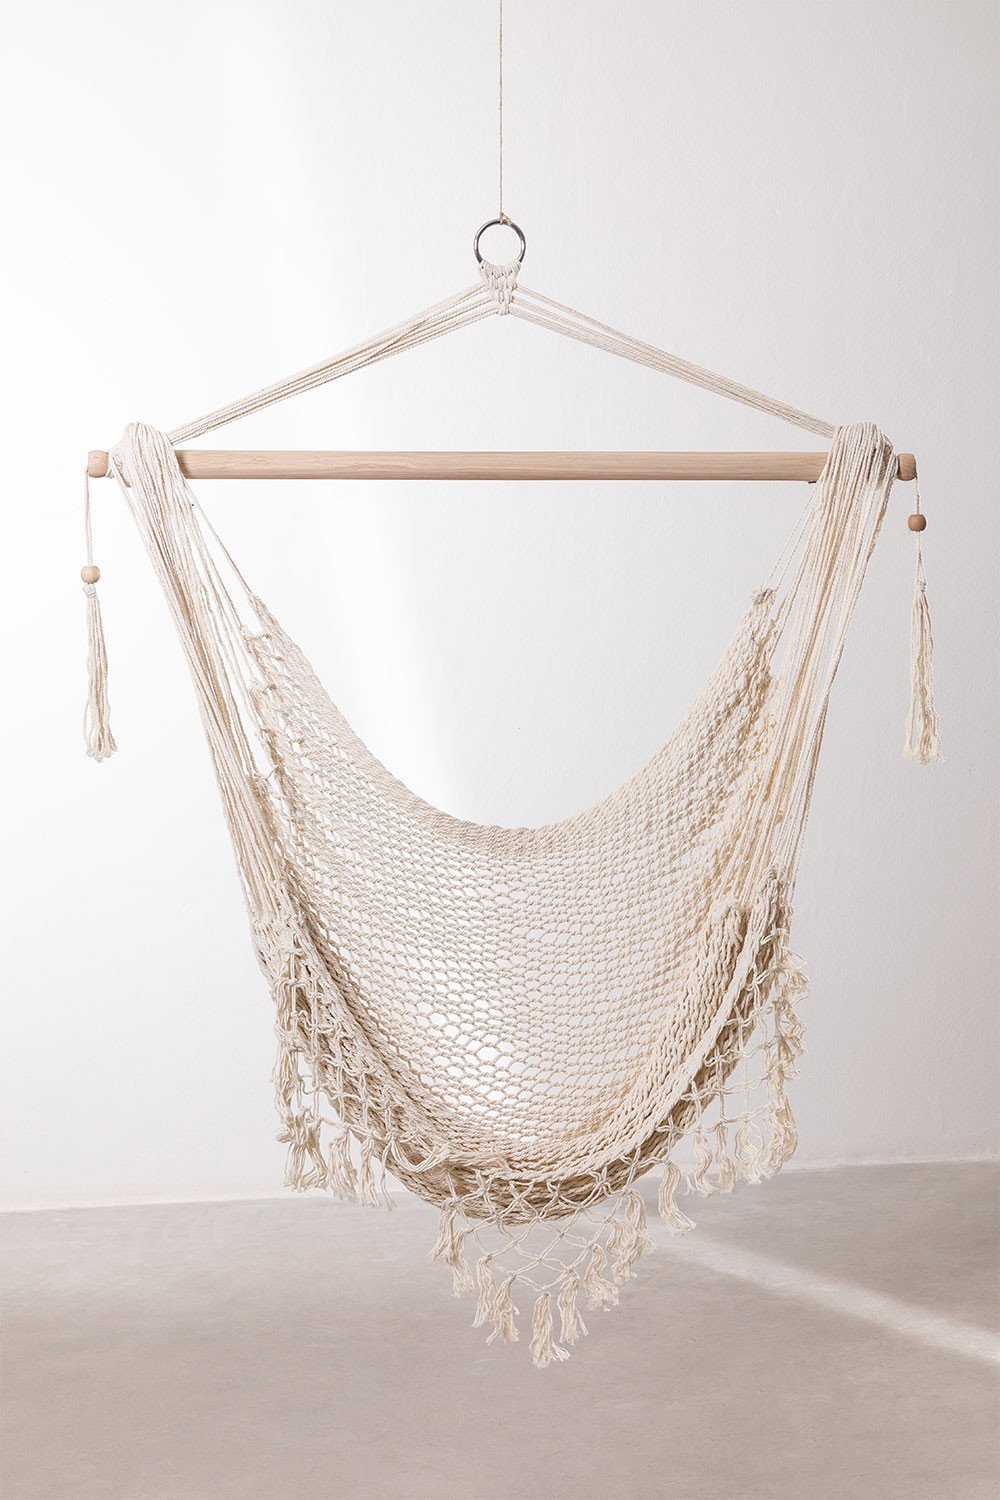 Hanging Chair Thana, gallery image 1